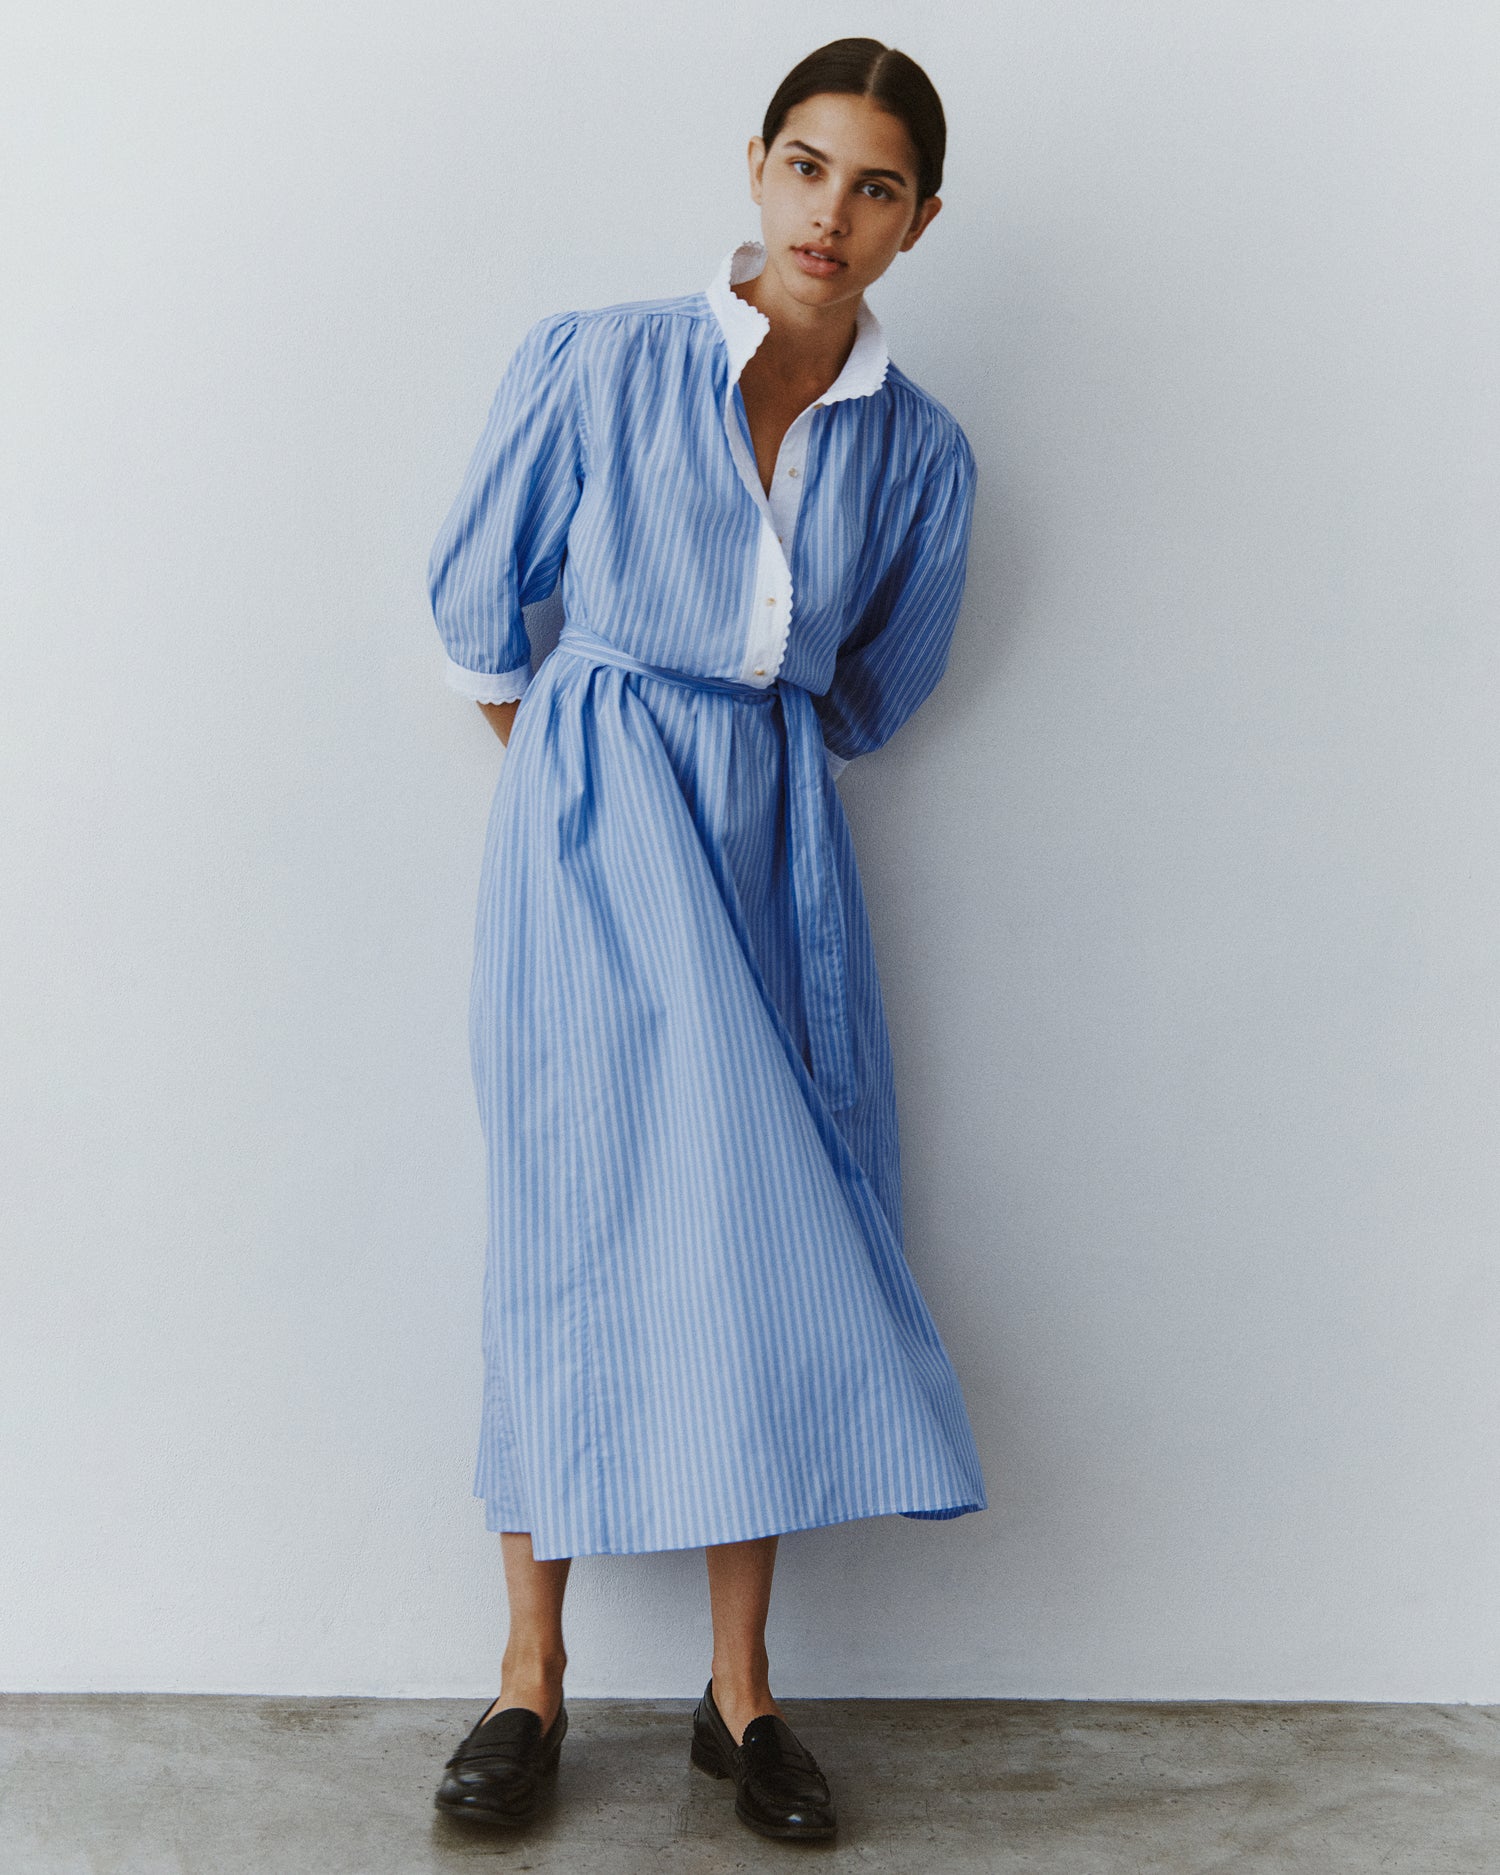 A woman stands with her hands behind her back wearing a midi-length shirt dress in blue striped cotton with a white placket and cuffs.